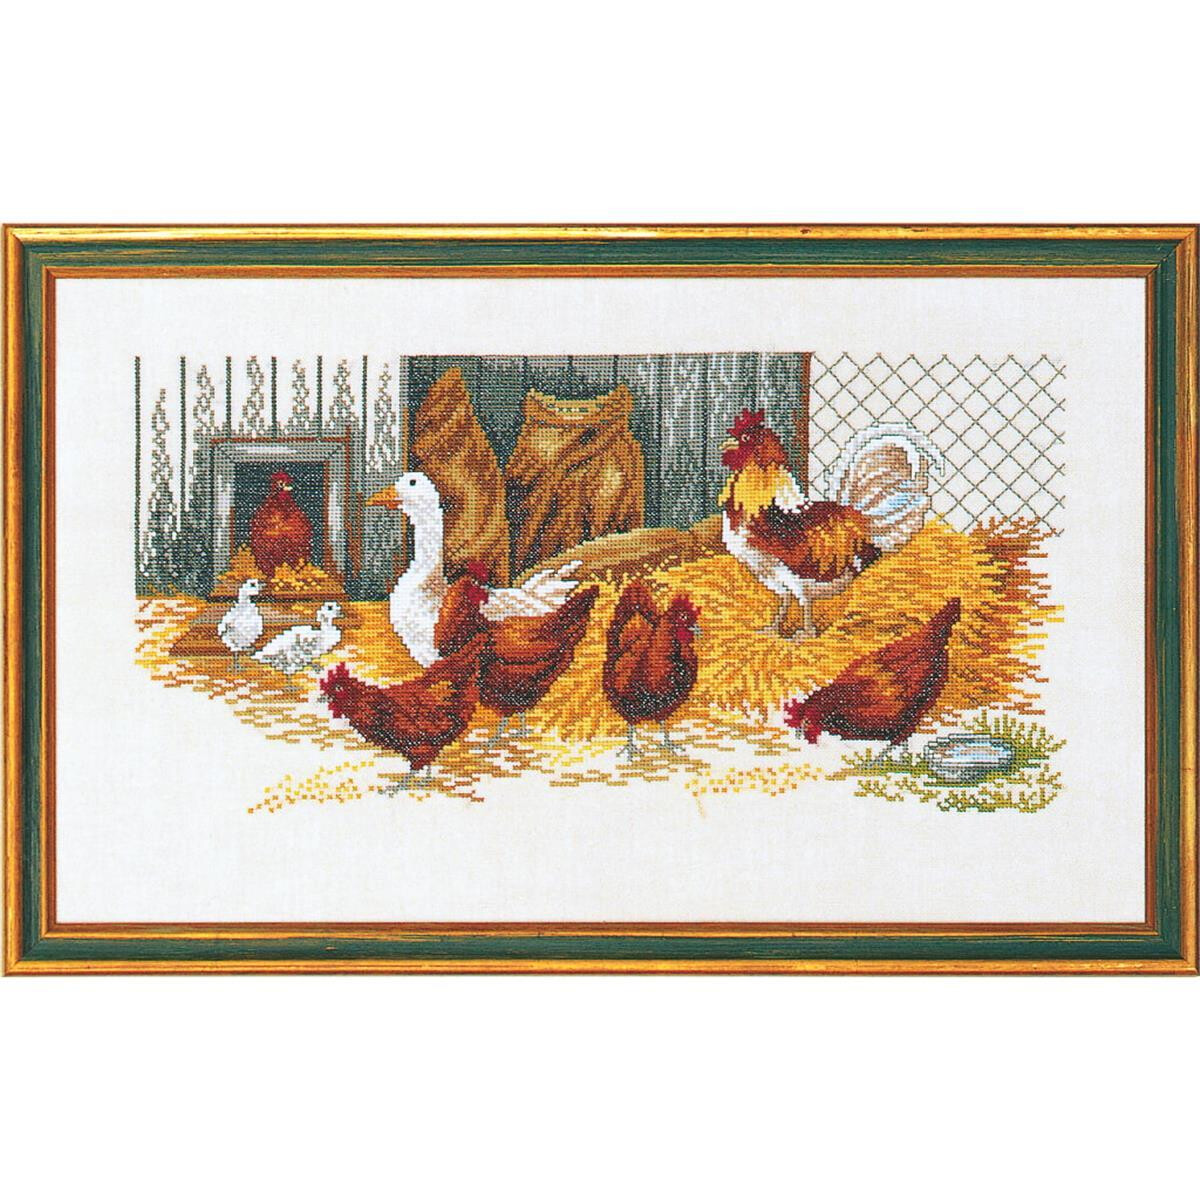 Eva Rosenstand counted cross stitch kit "Fowls and...